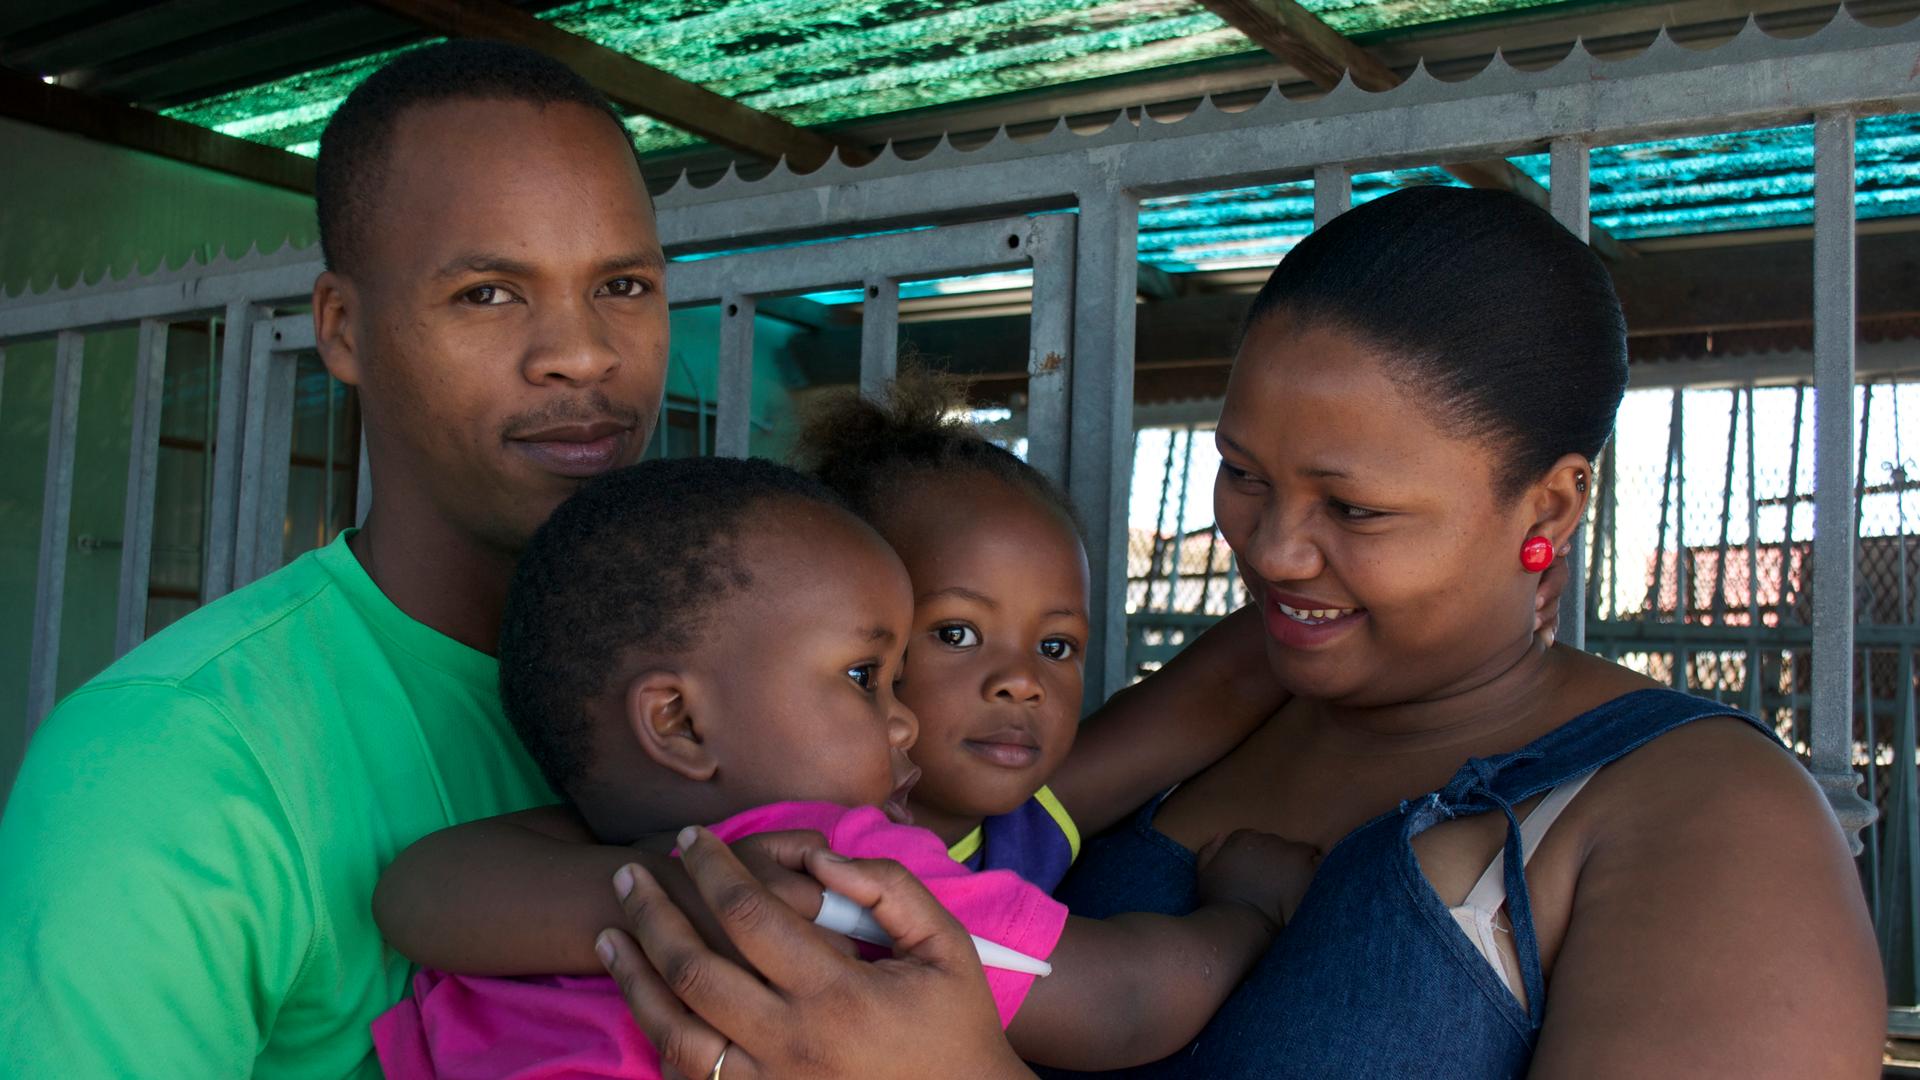 The Mraqisa family (L to R): father Lindela, son Bukho, daughter Ongeziwe and mother Nosicelo outside their home in Gugulethu Township.